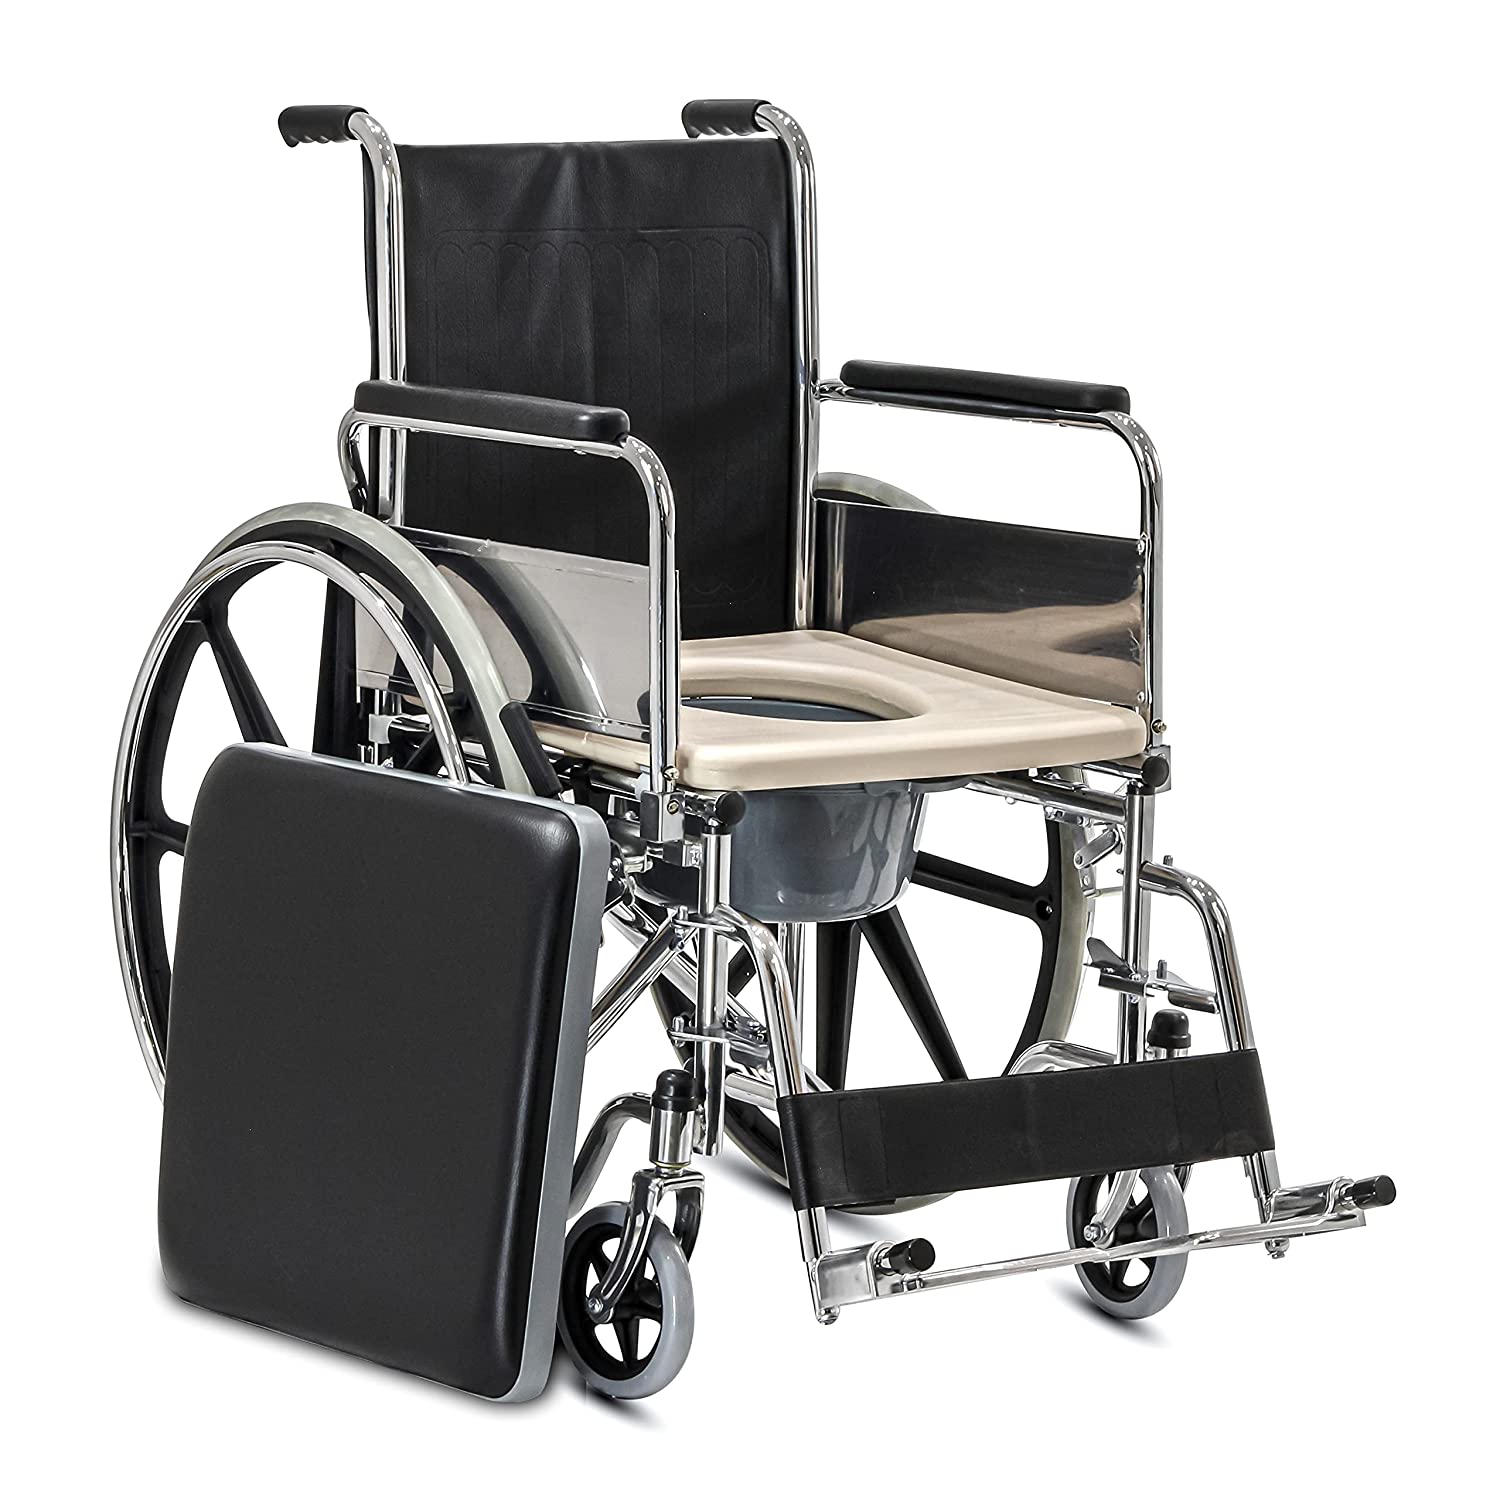 Wheelchair, Hospital Quality with Commode